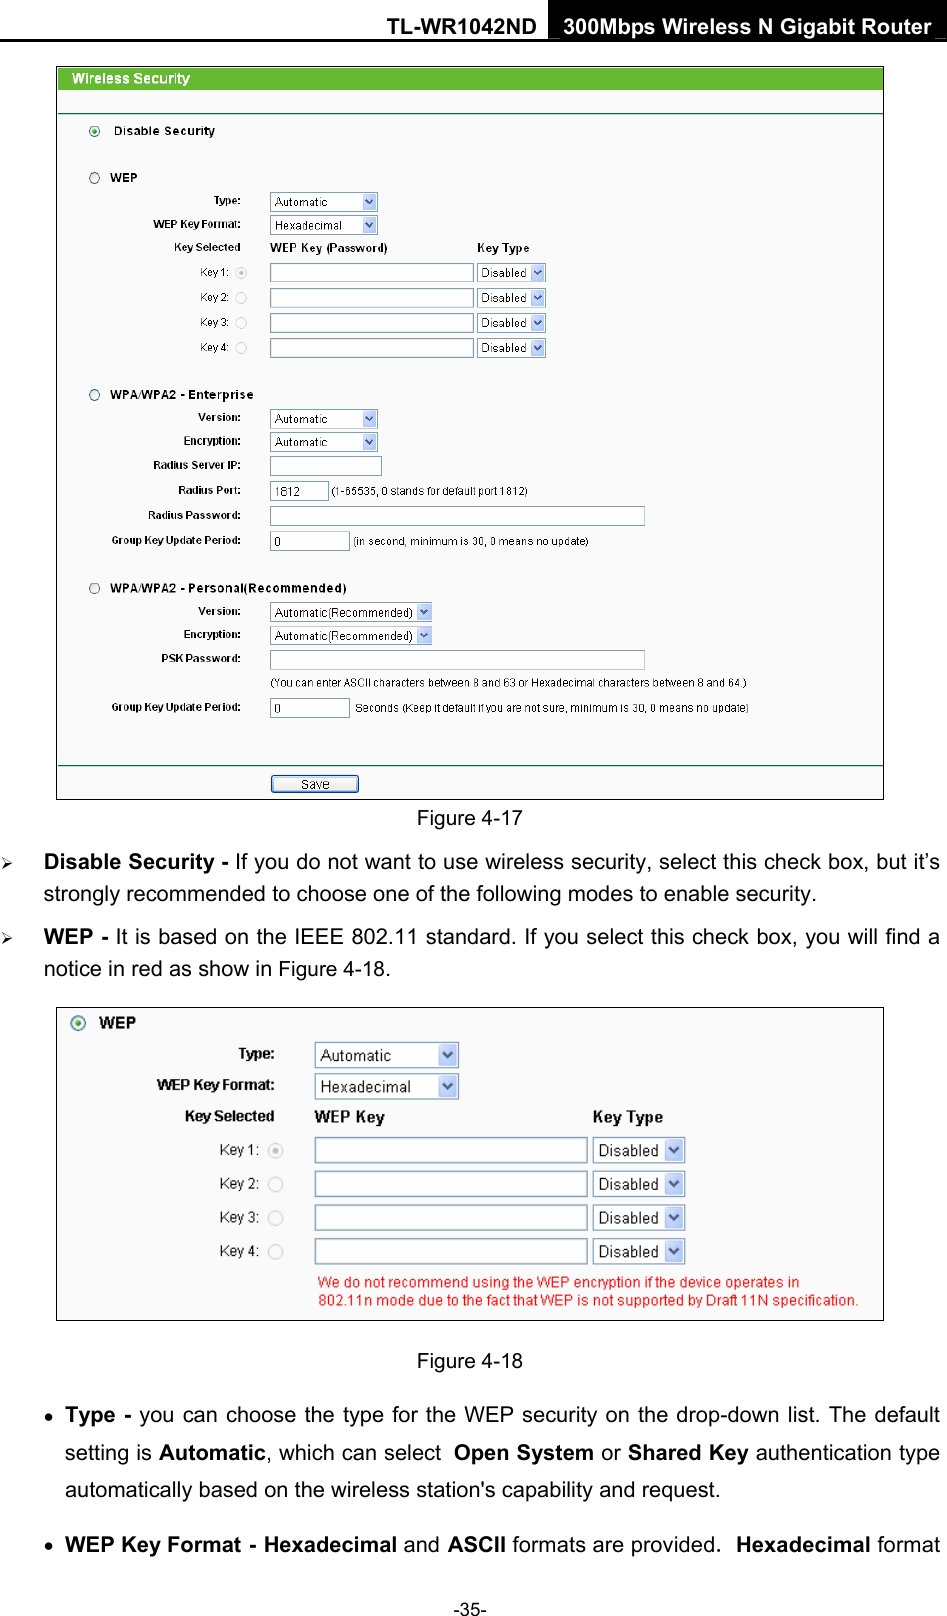 TL-WR1042ND 300Mbps Wireless N Gigabit Router -35-  Figure 4-17 ¾ Disable Security - If you do not want to use wireless security, select this check box, but it’s strongly recommended to choose one of the following modes to enable security. ¾ WEP - It is based on the IEEE 802.11 standard. If you select this check box, you will find a notice in red as show in Figure 4-18.   Figure 4-18 • Type - you can choose the type for the WEP security on the drop-down list. The default setting is Automatic, which can select Open System or Shared Key authentication type automatically based on the wireless station&apos;s capability and request. • WEP Key Format - Hexadecimal and ASCII formats are provided. Hexadecimal format 